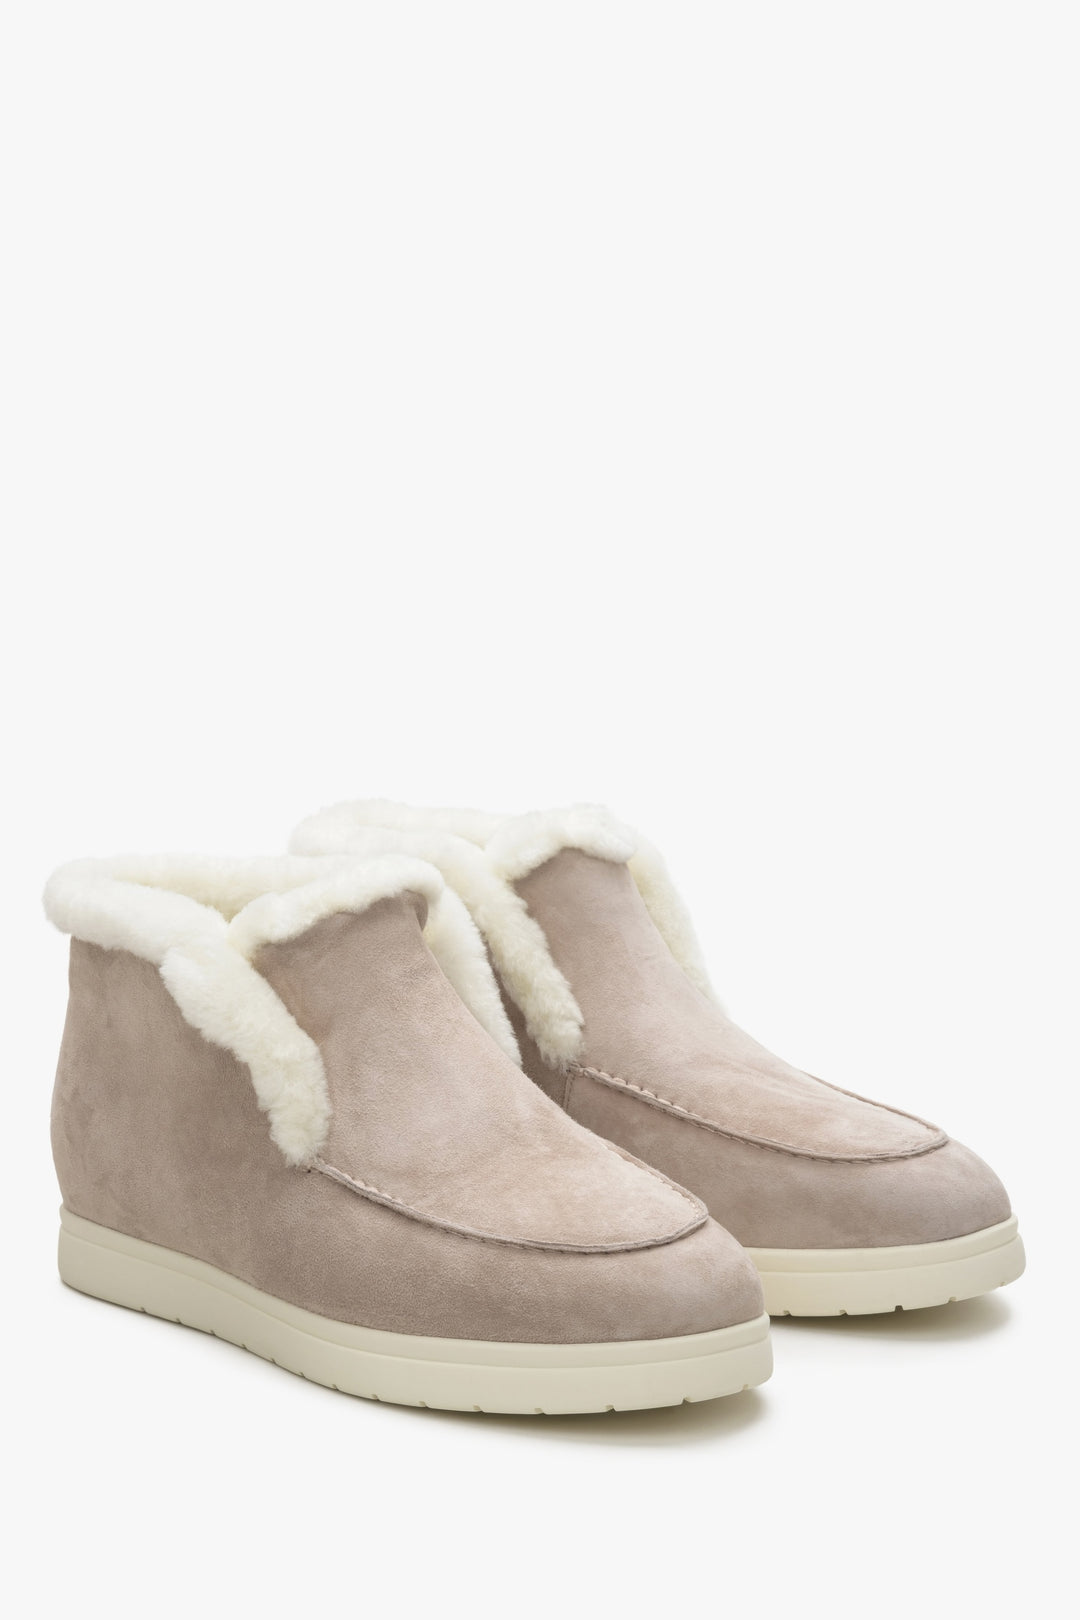 Women's Pale Pink Low-Top Boots made of Genuine Velour & Fur Estro ER00114380